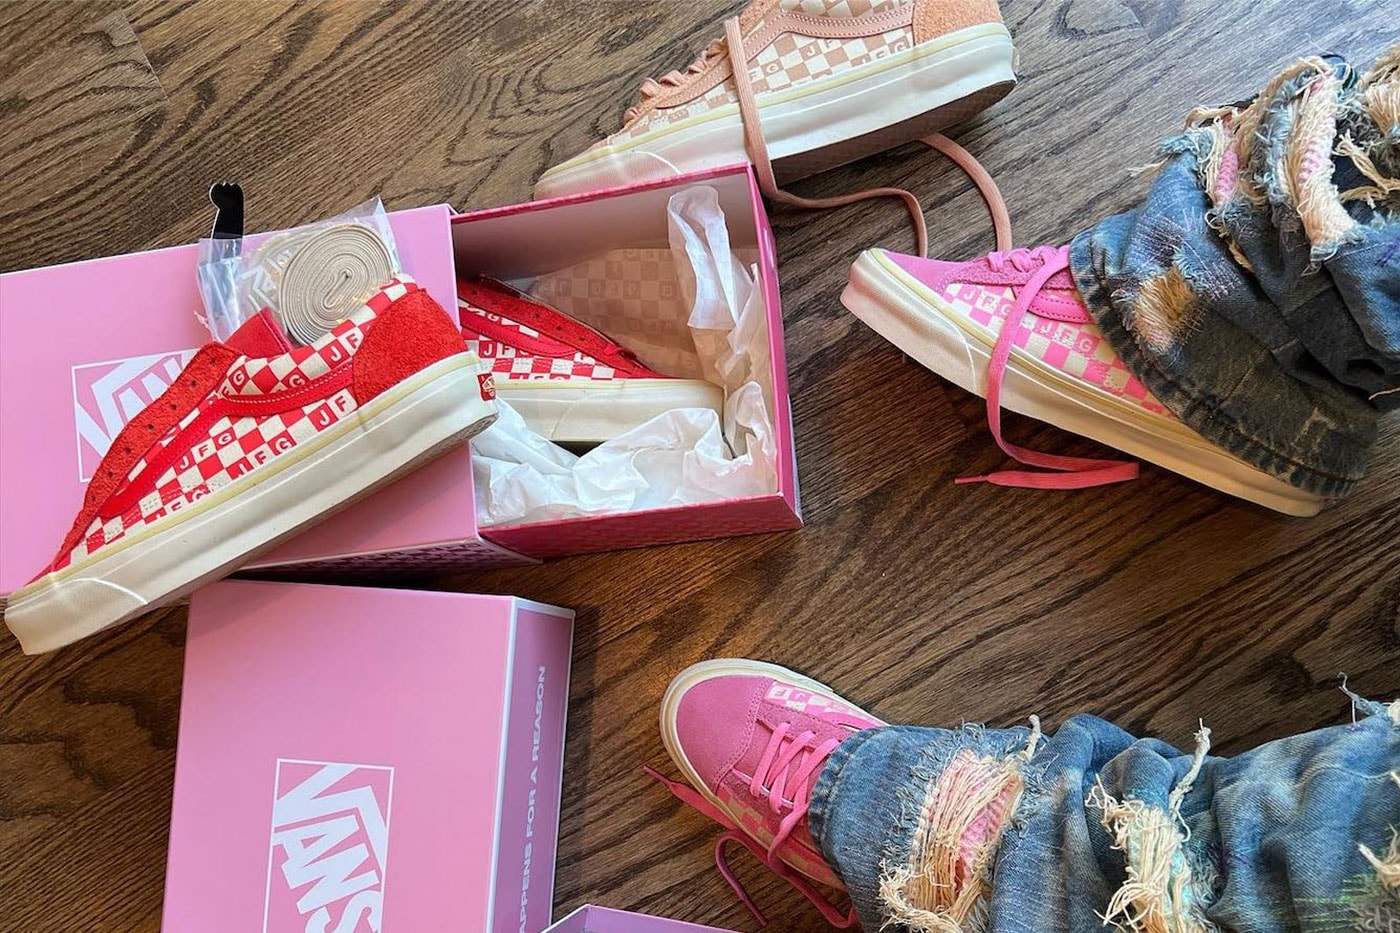 Joe Freshgoods Vans Vault Style 36 Pink Peach Red checkerboard everything happens for a reason three colorways release info